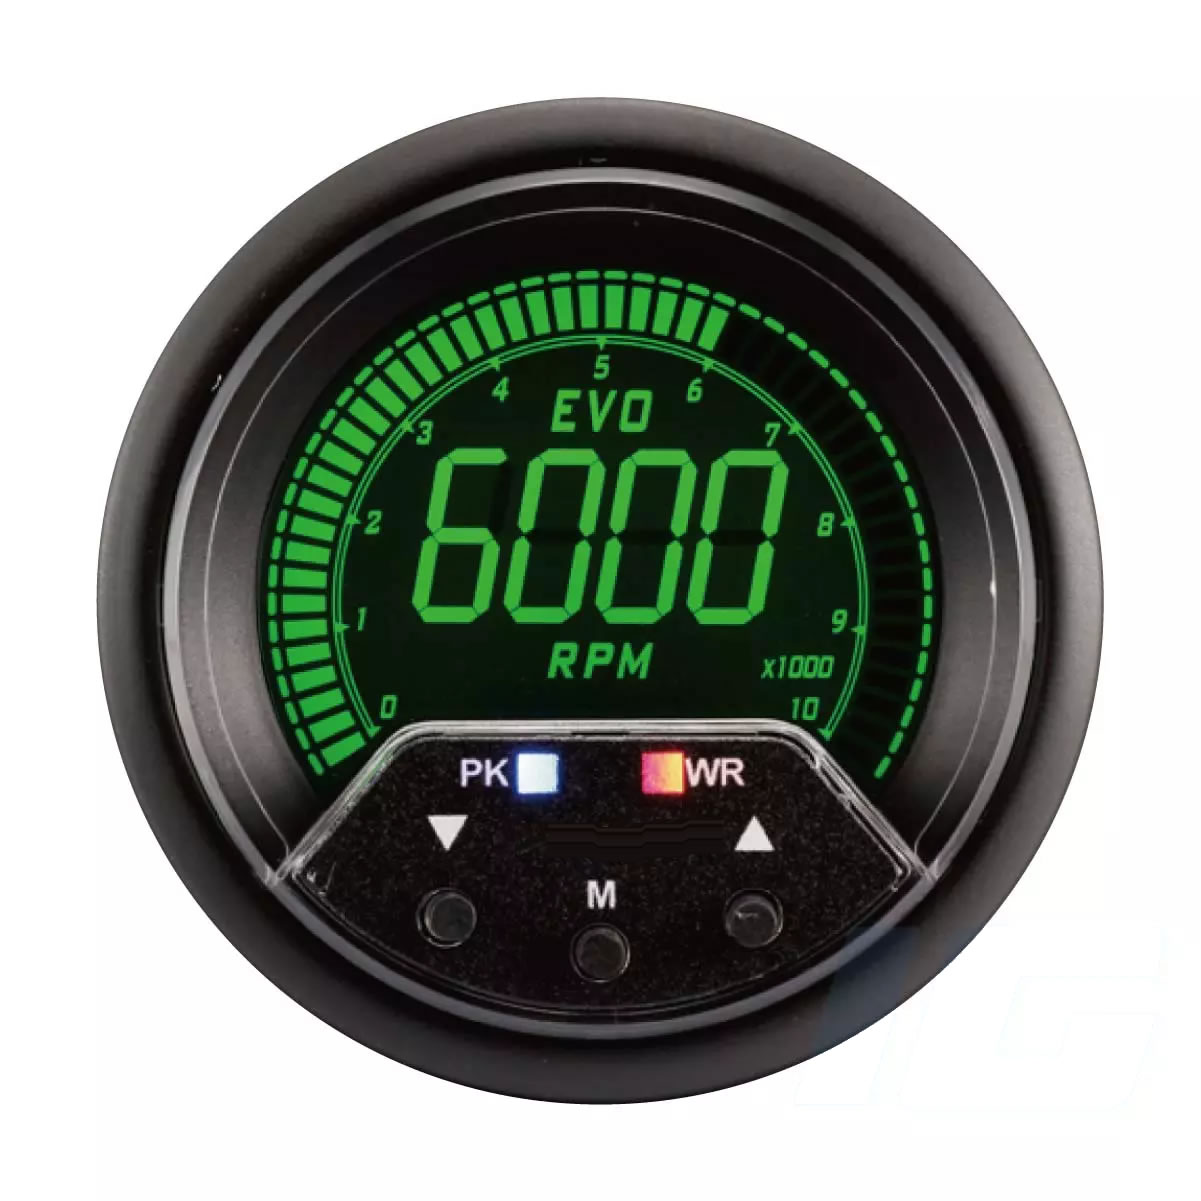 60mm LCD Performance Car Gauges - Tachometer With Warning and Peak For Your Sport Racing Car